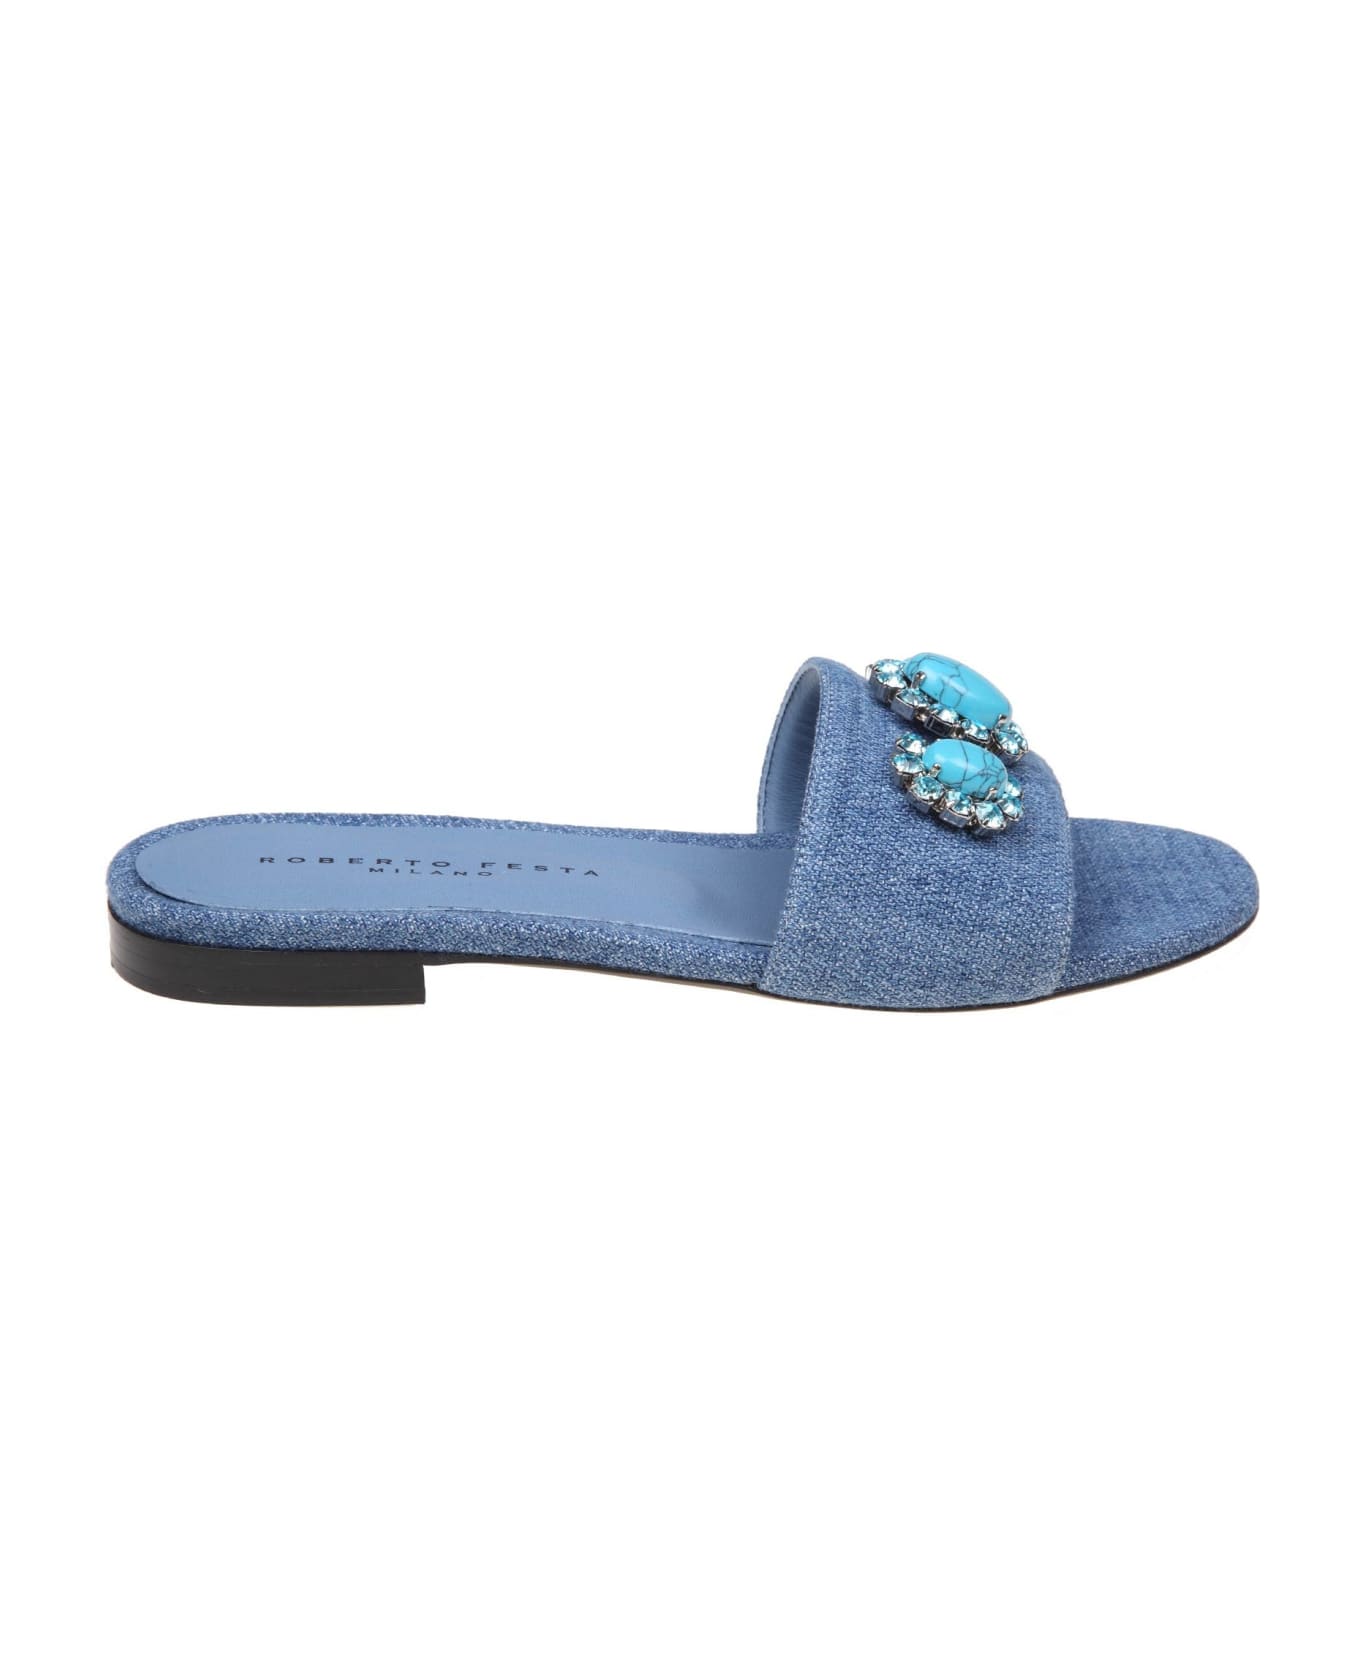 Roberto Festa Panarea Slippers In Jeans With Applied Stones - Jeans サンダル